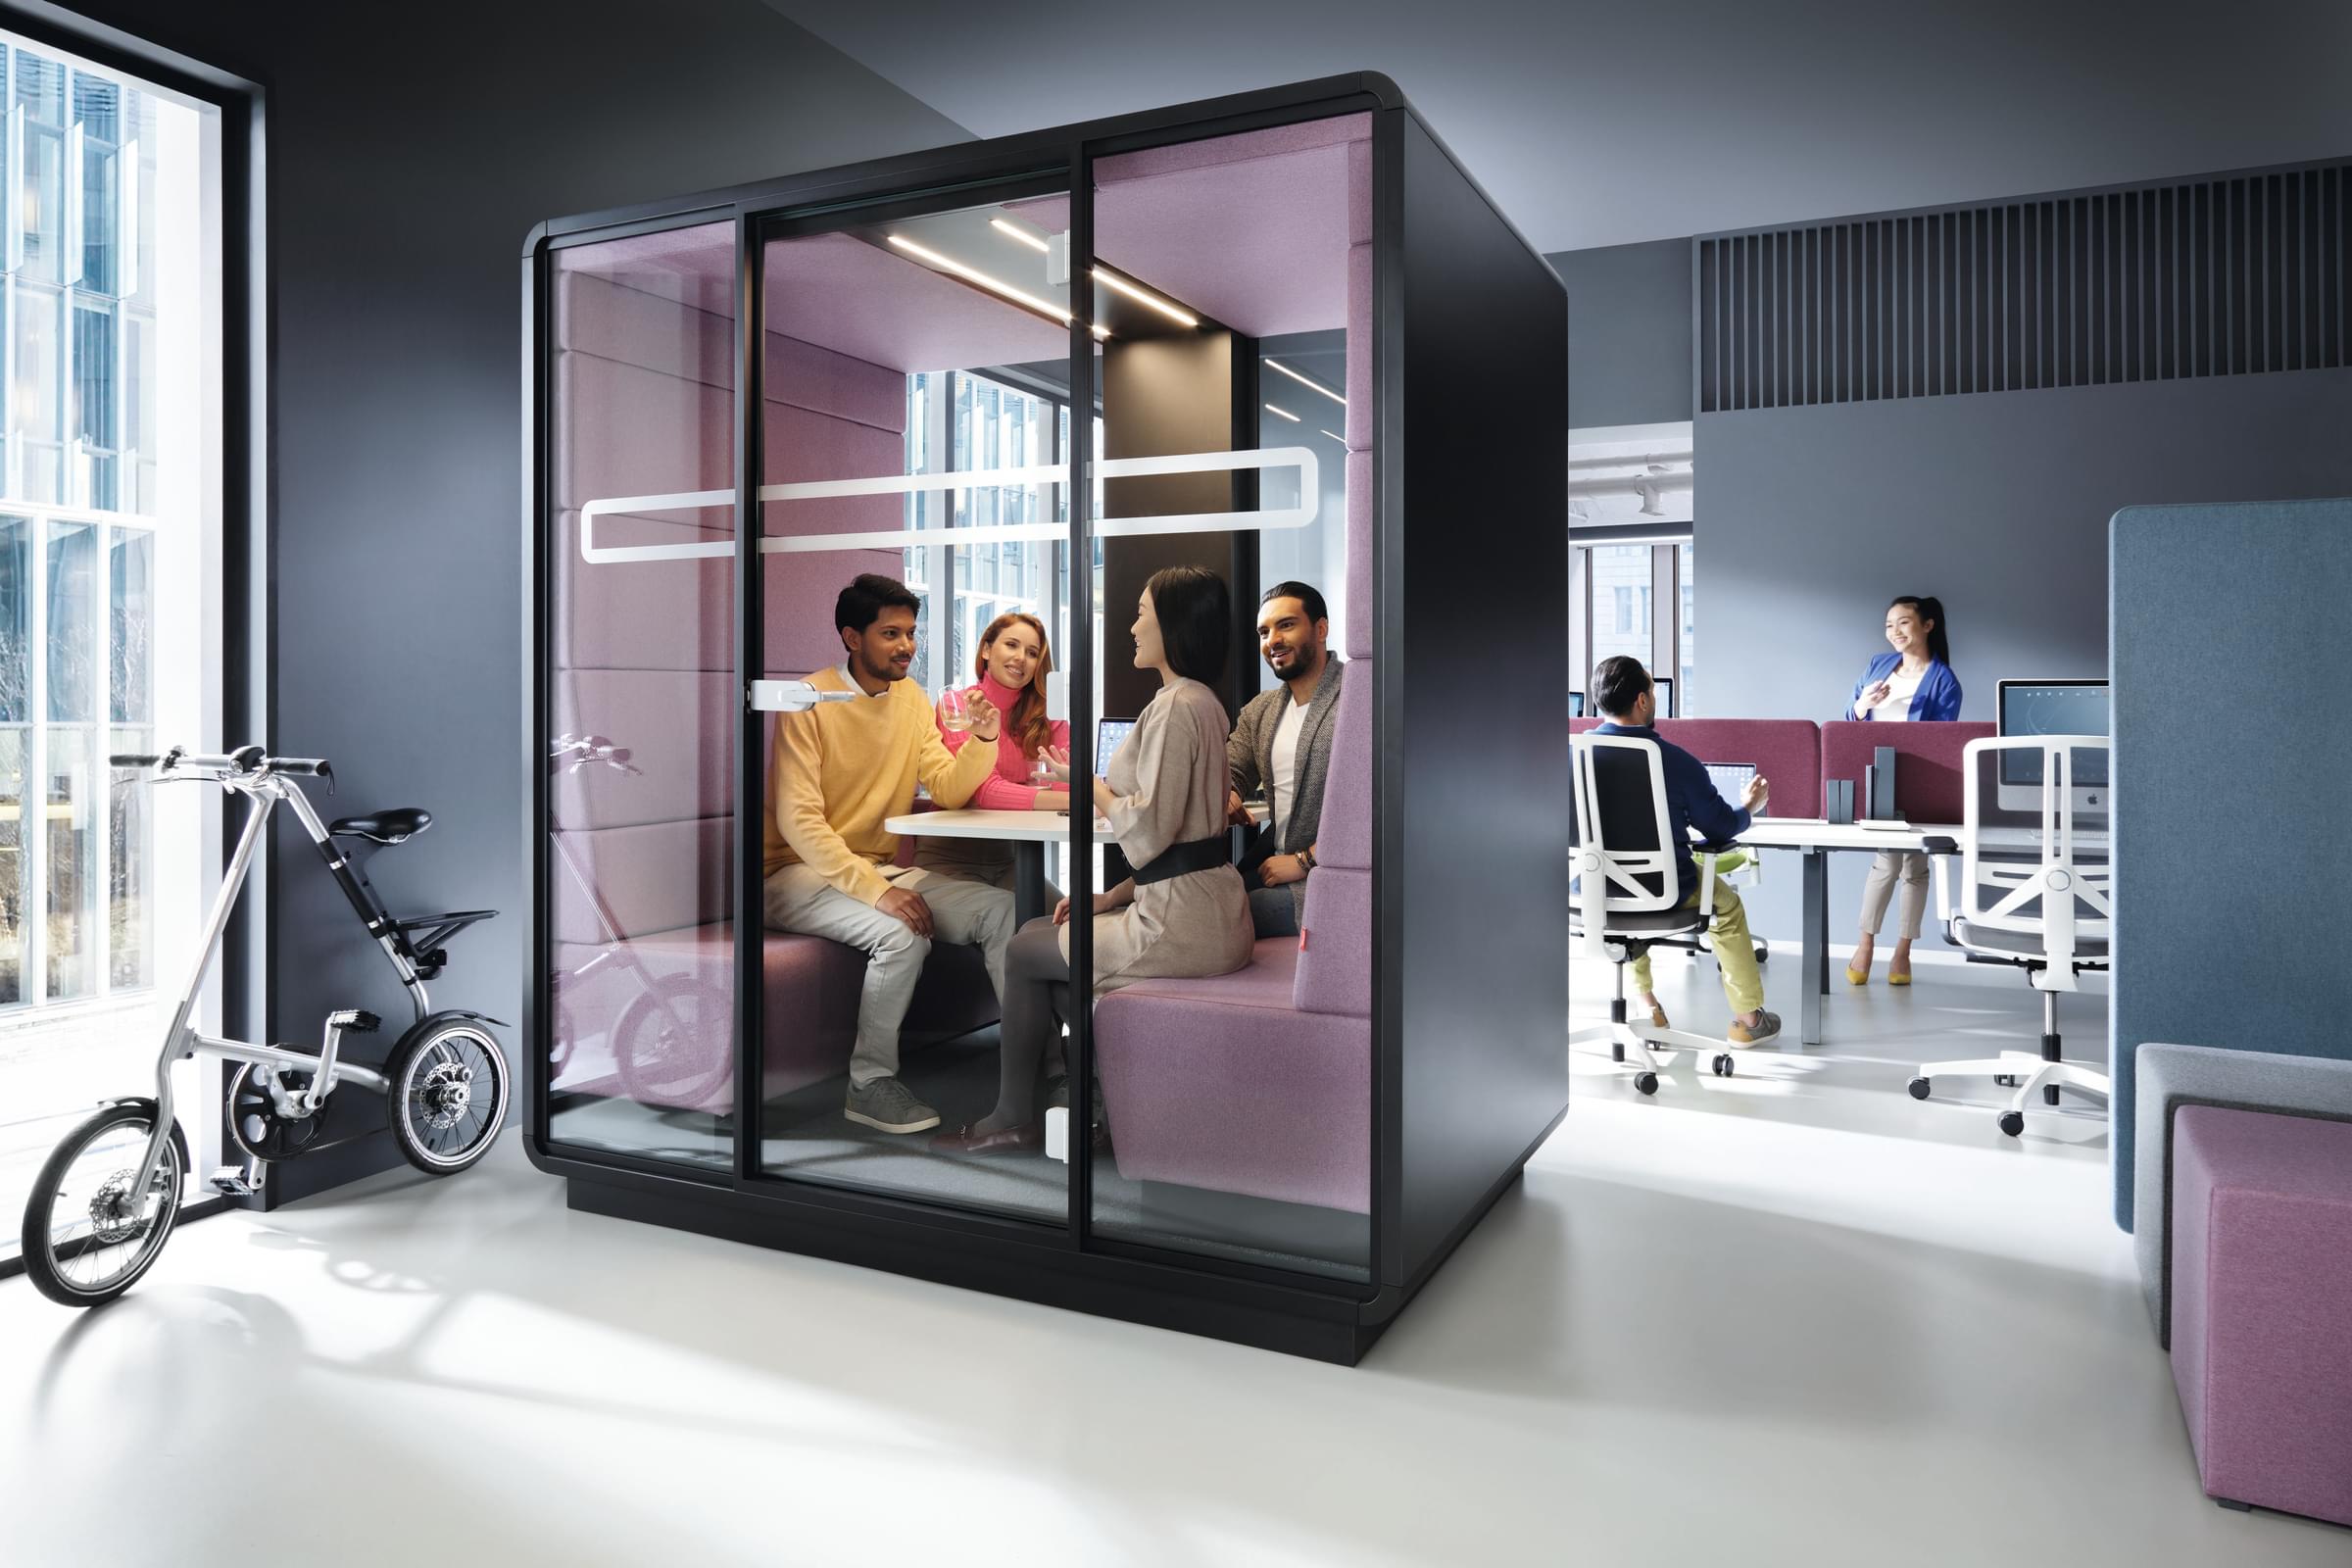 The hush Meet 4 person office meeting pod is a serene meeting space where even the most introverted shine